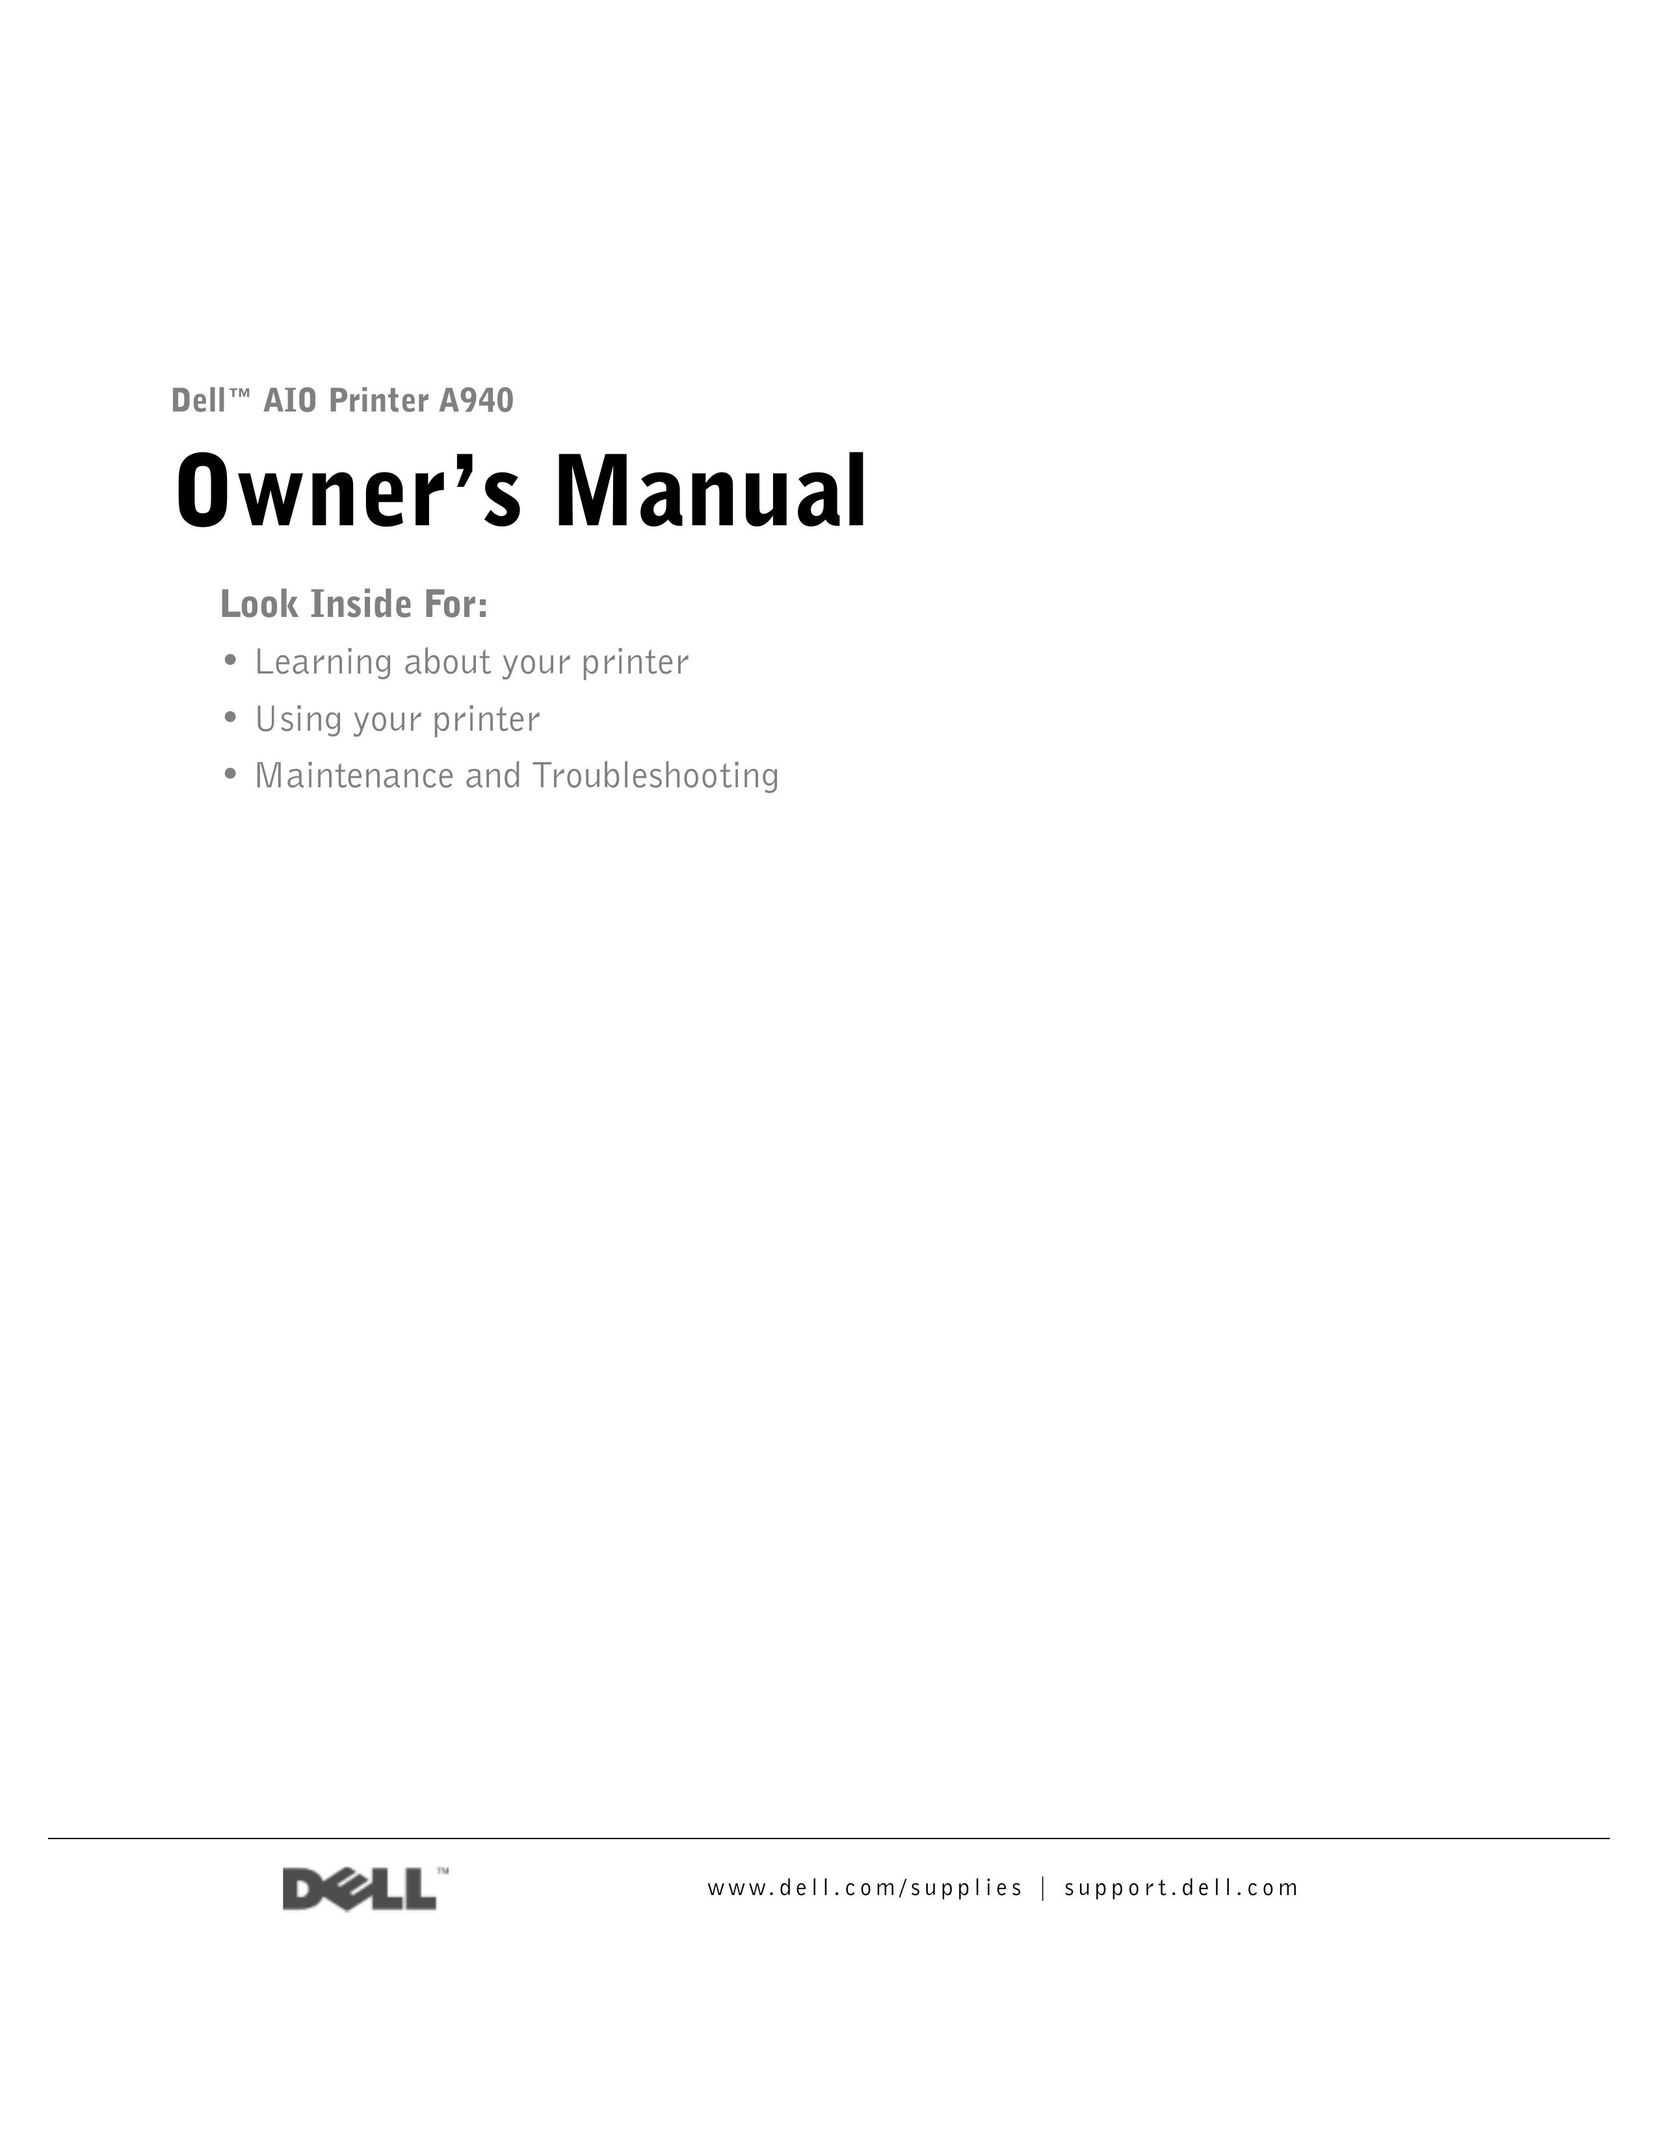 Dell A940 All in One Printer User Manual